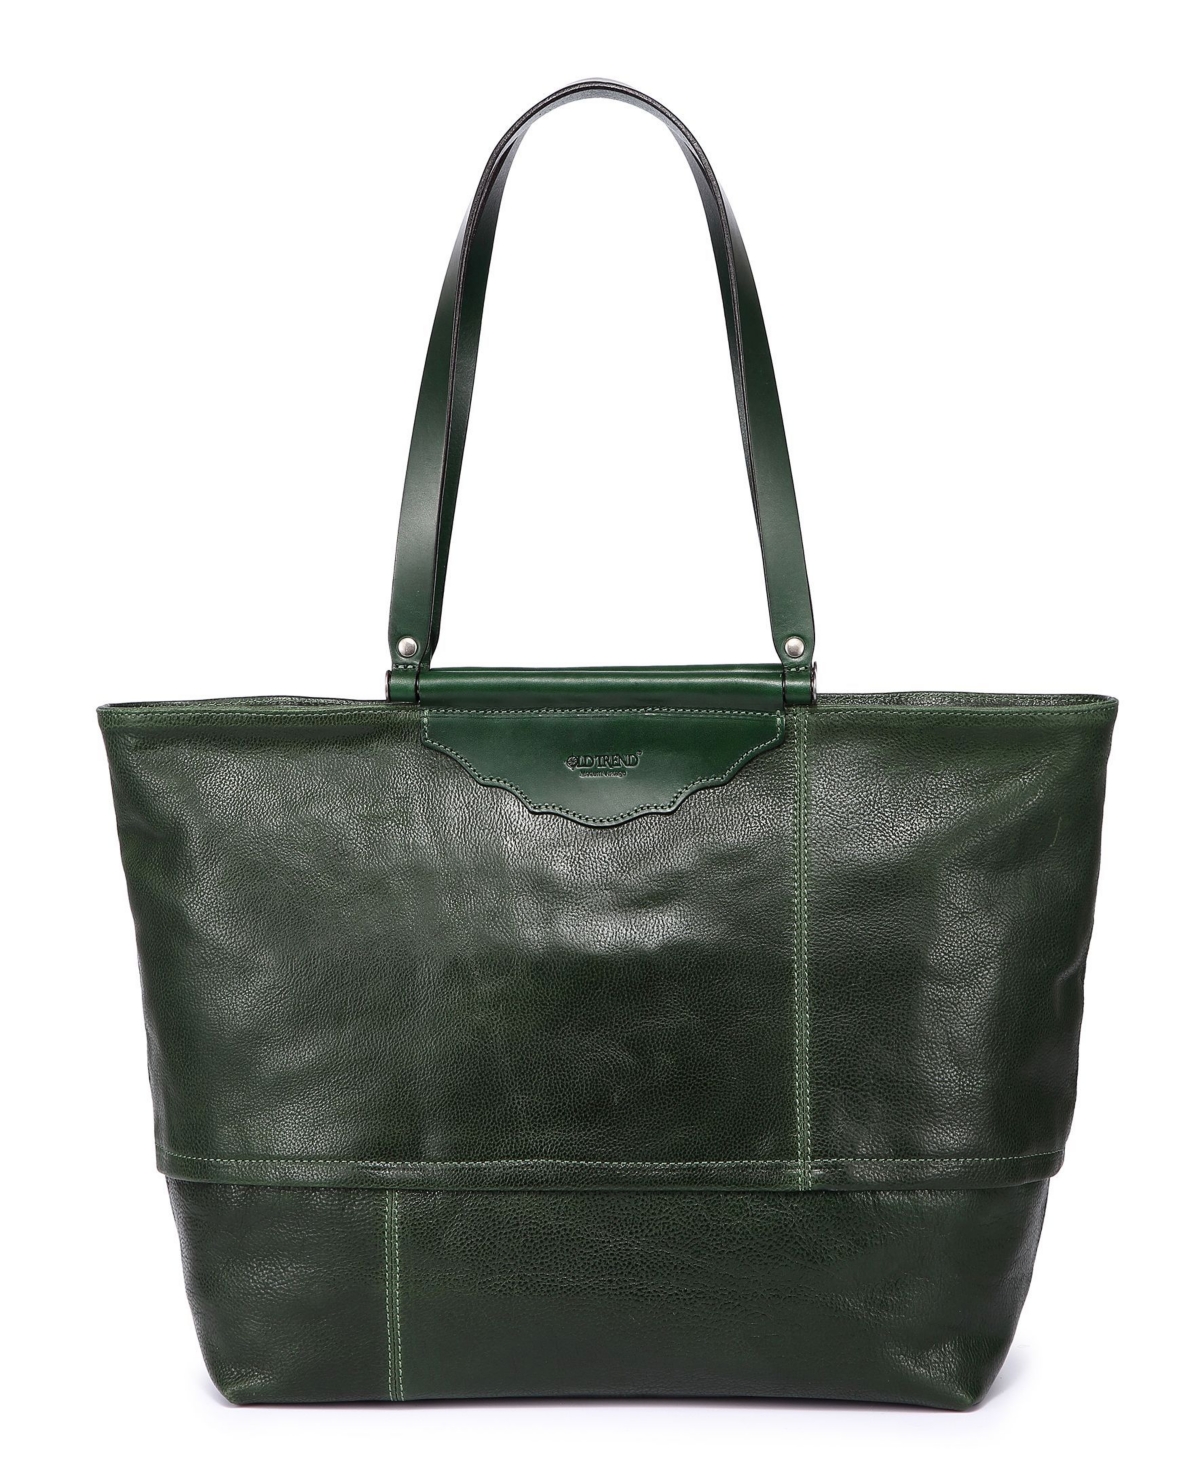 Women's Genuine Leather Holly Leaf Tote Bag - Kale